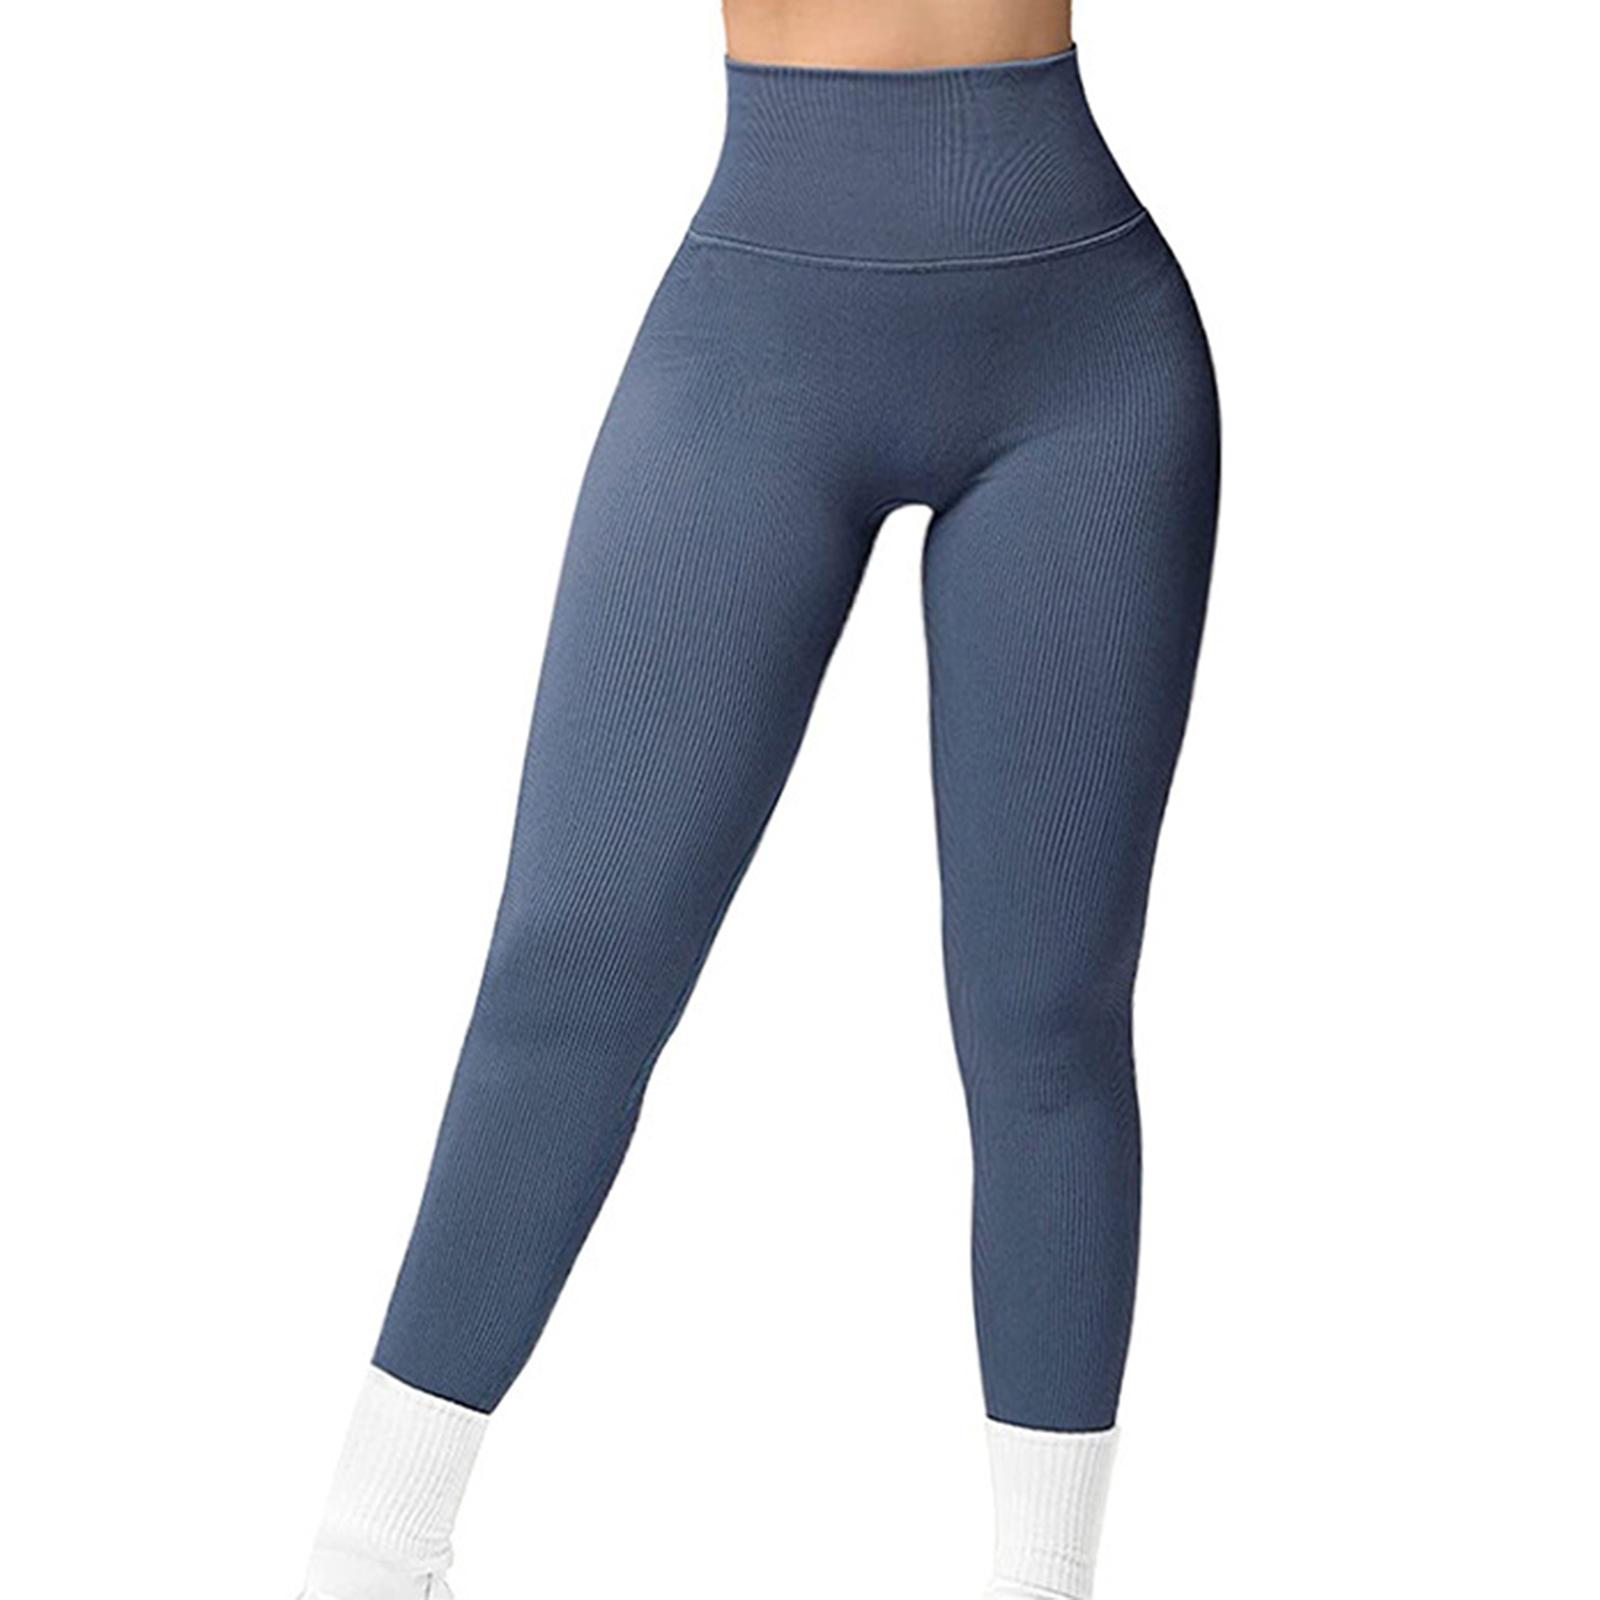 Womens Yoga Pants High Waist Leggings Stretch for Running Exercise Workout Blue Gray M